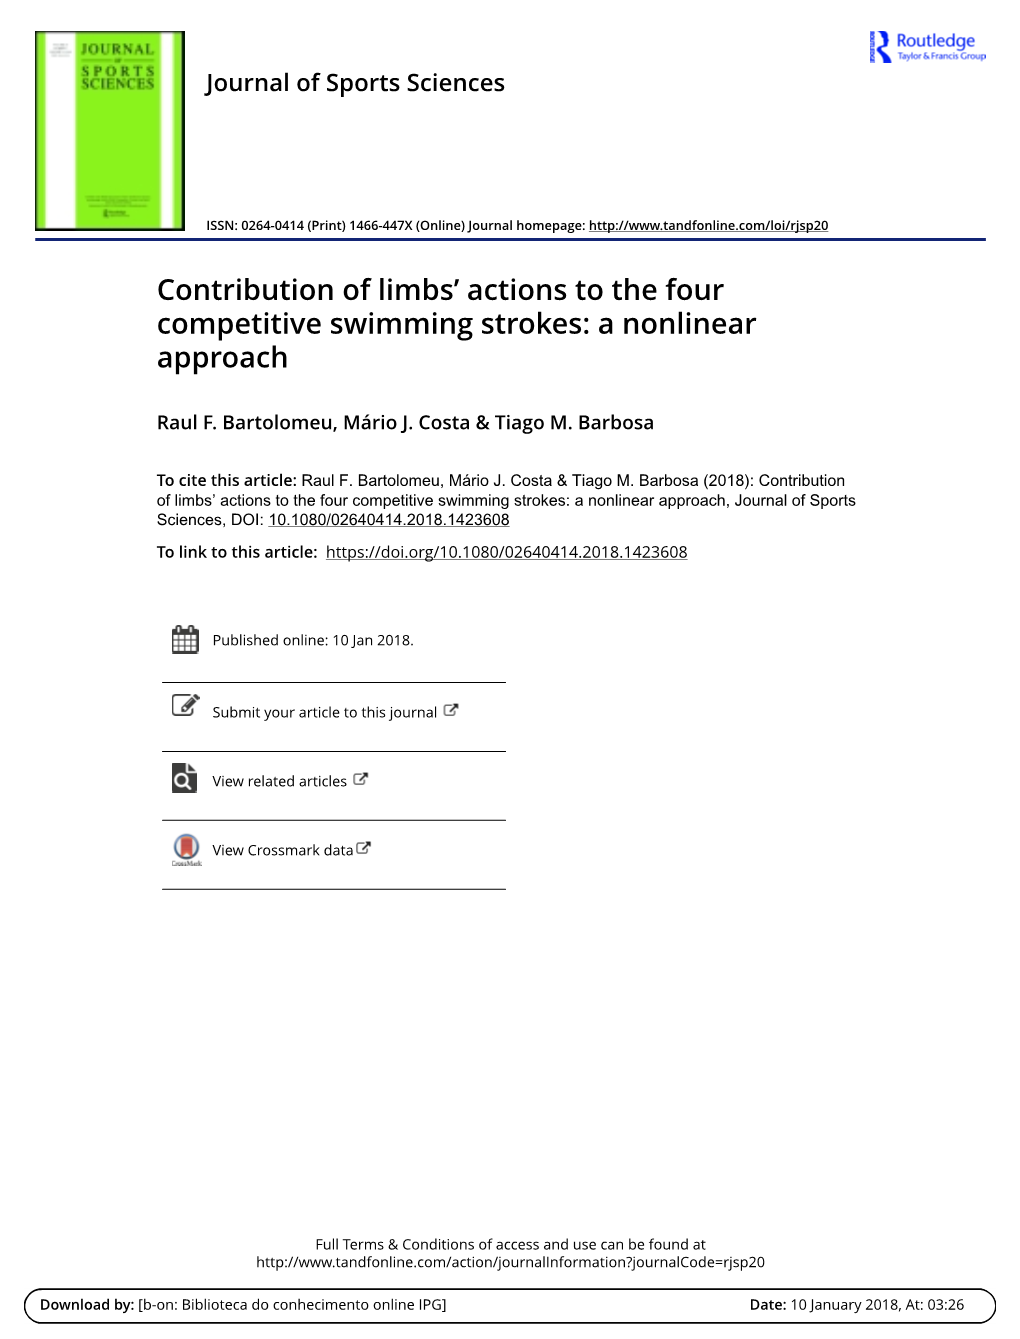 Contribution of Limbs' Actions to the Four Competitive Swimming Strokes